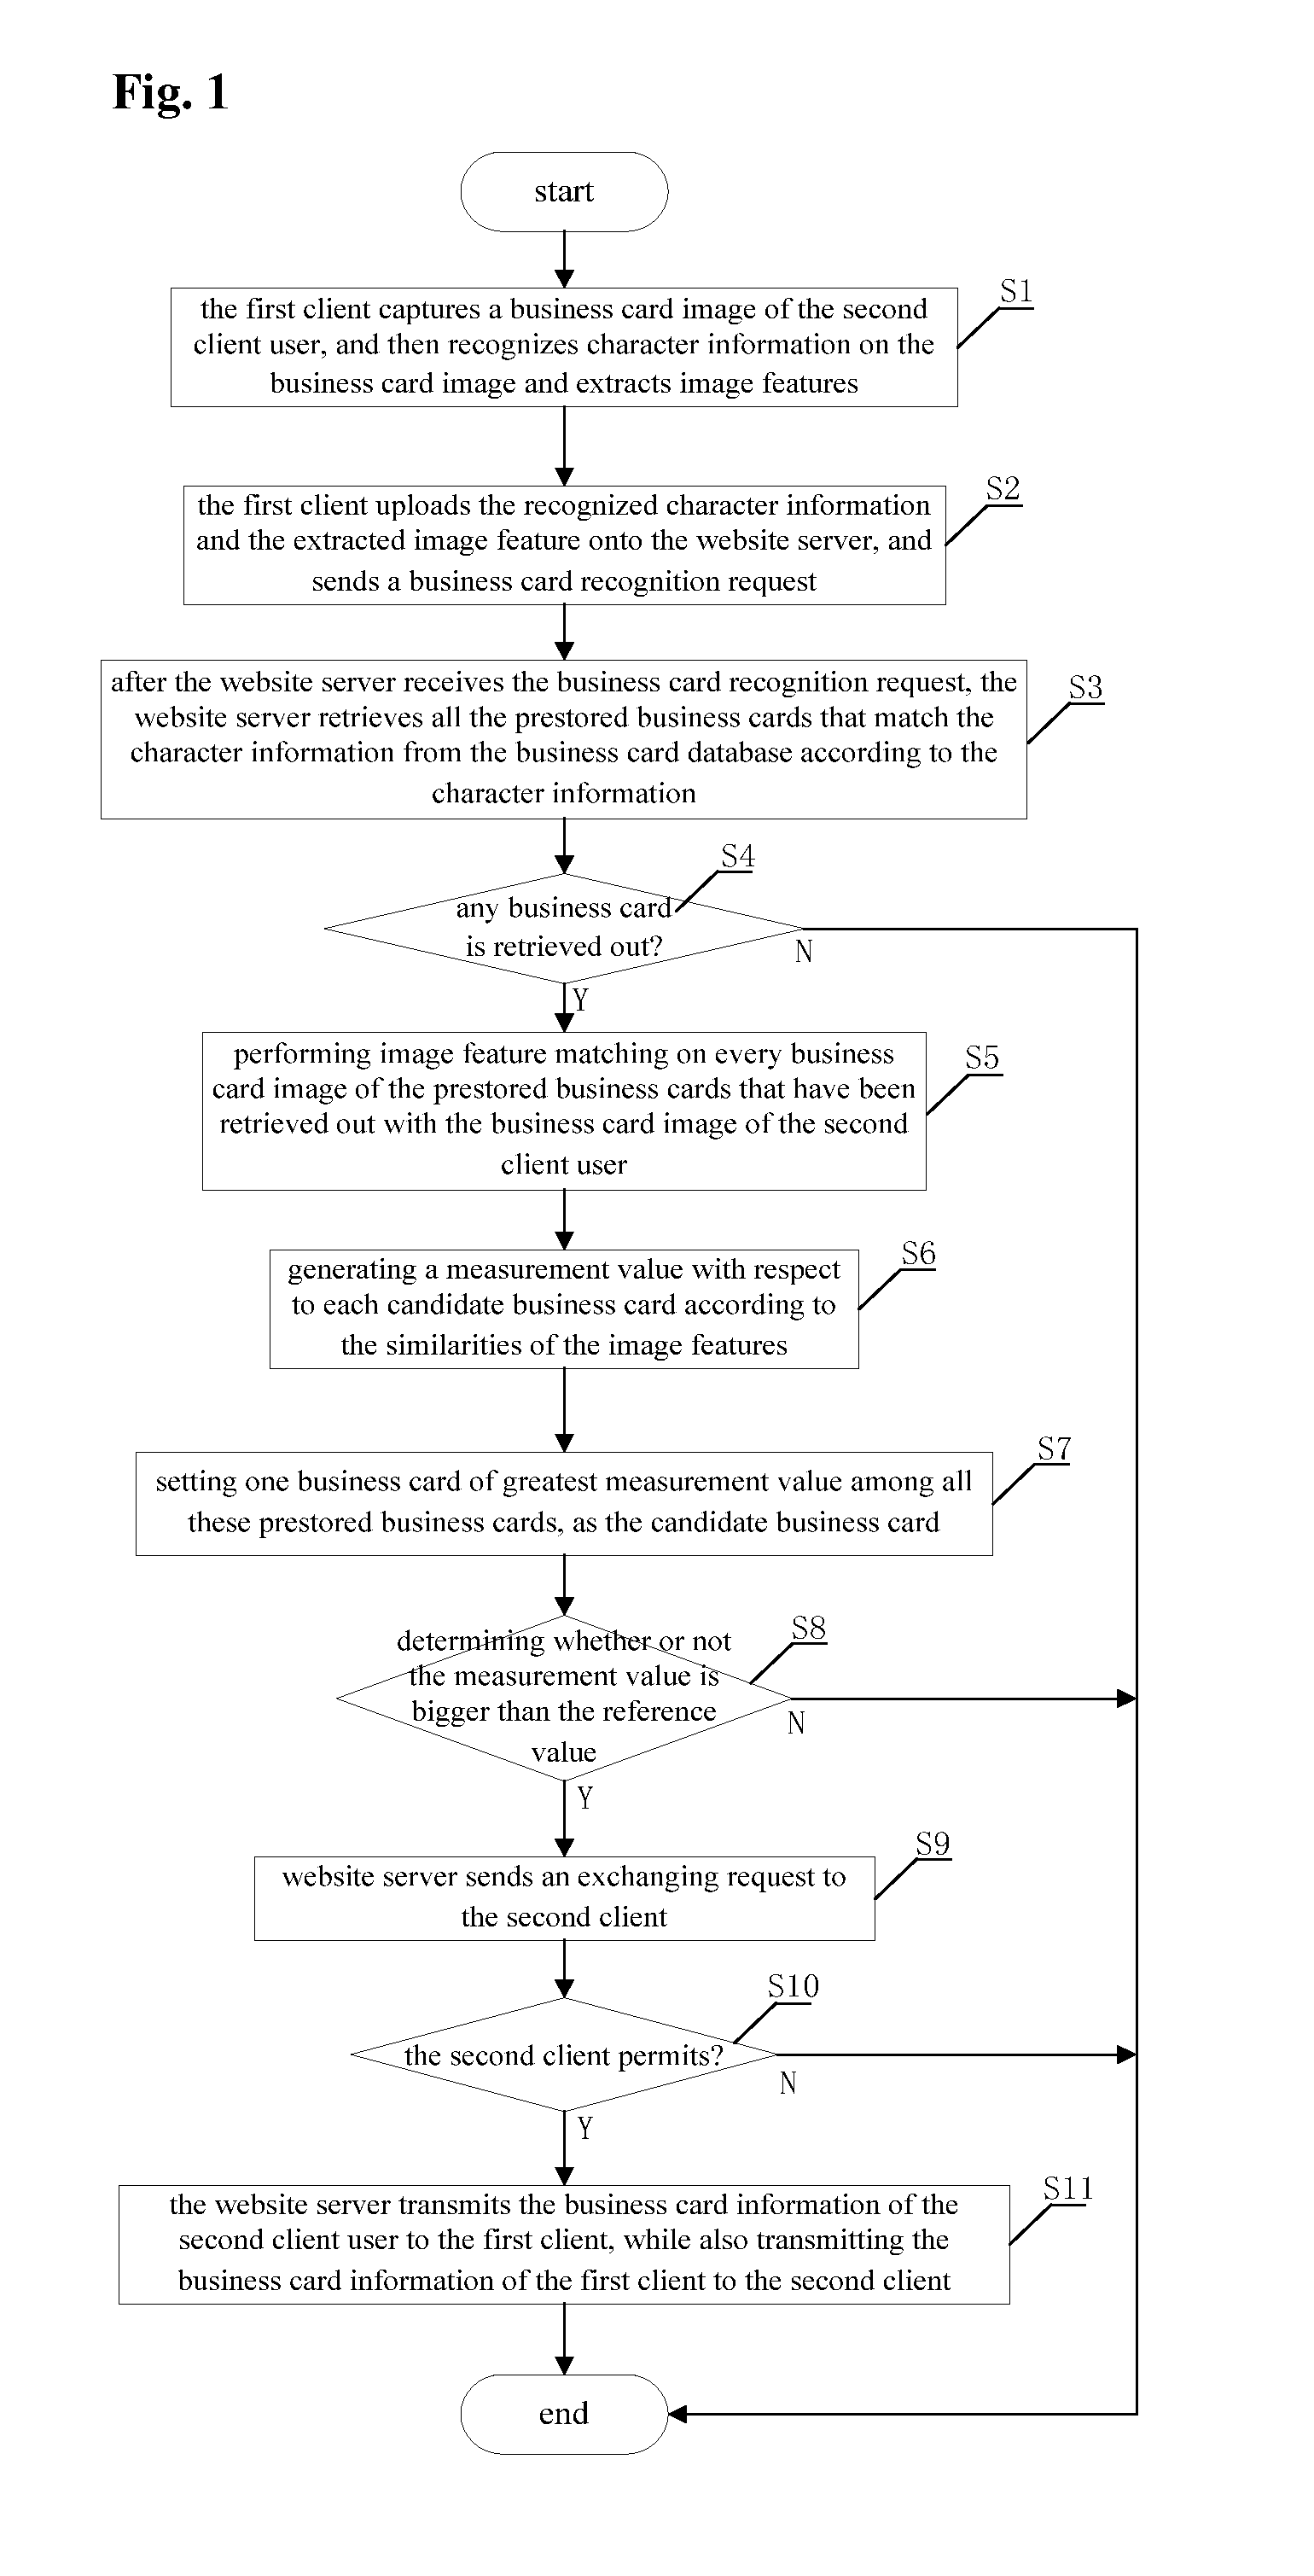 Business card information exchange method combining character recognition and image matching